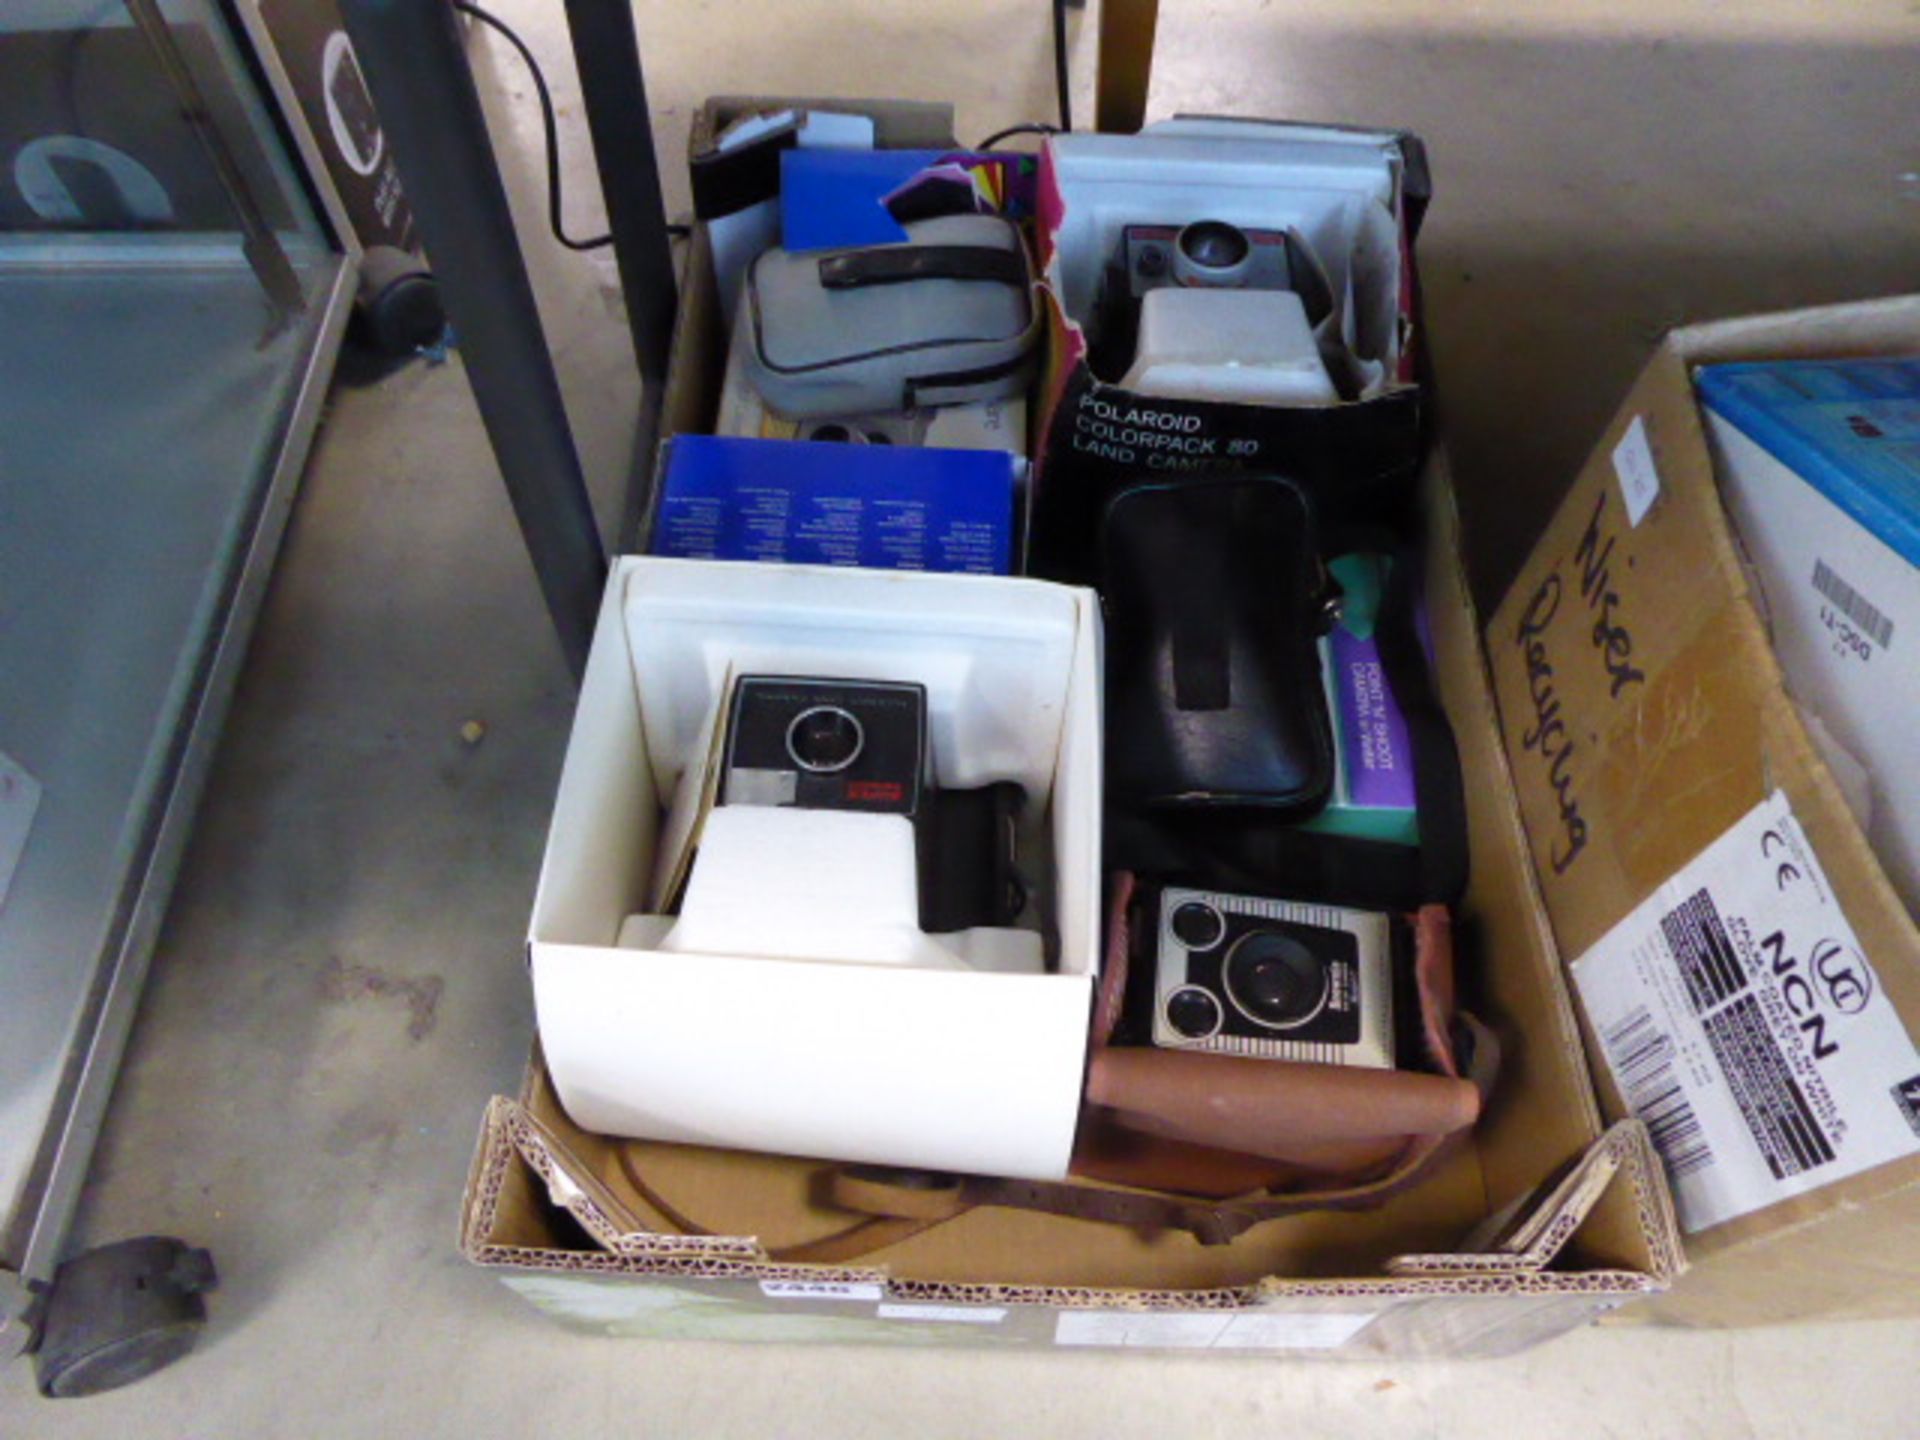 A selection of vintage film camera equipment including Polaroid Swing cameras